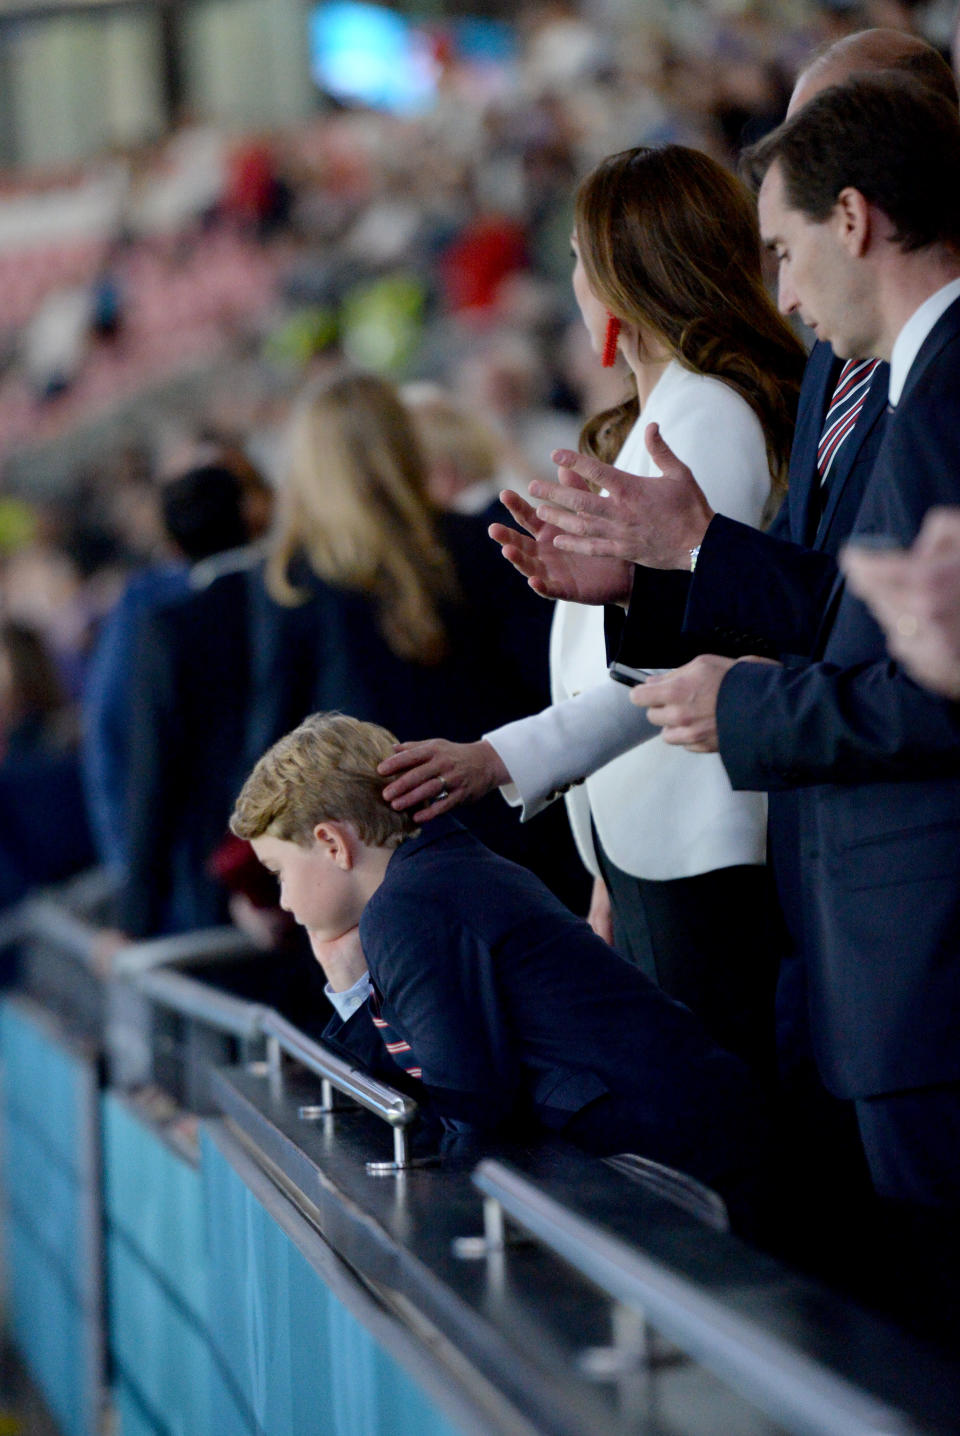 LONDON, ENGLAND - JULY 11: Prince George of Cambridge, Catherine, Duchess of Cambridge, and Prince William, Duke of Cambridge and President of the Football Association (FA) are seen in the stands prior to the UEFA Euro 2020 Championship Final between Italy and England at Wembley Stadium on July 11, 2021 in London, England. (Photo by Eamonn McCormack - UEFA/UEFA via Getty Images)